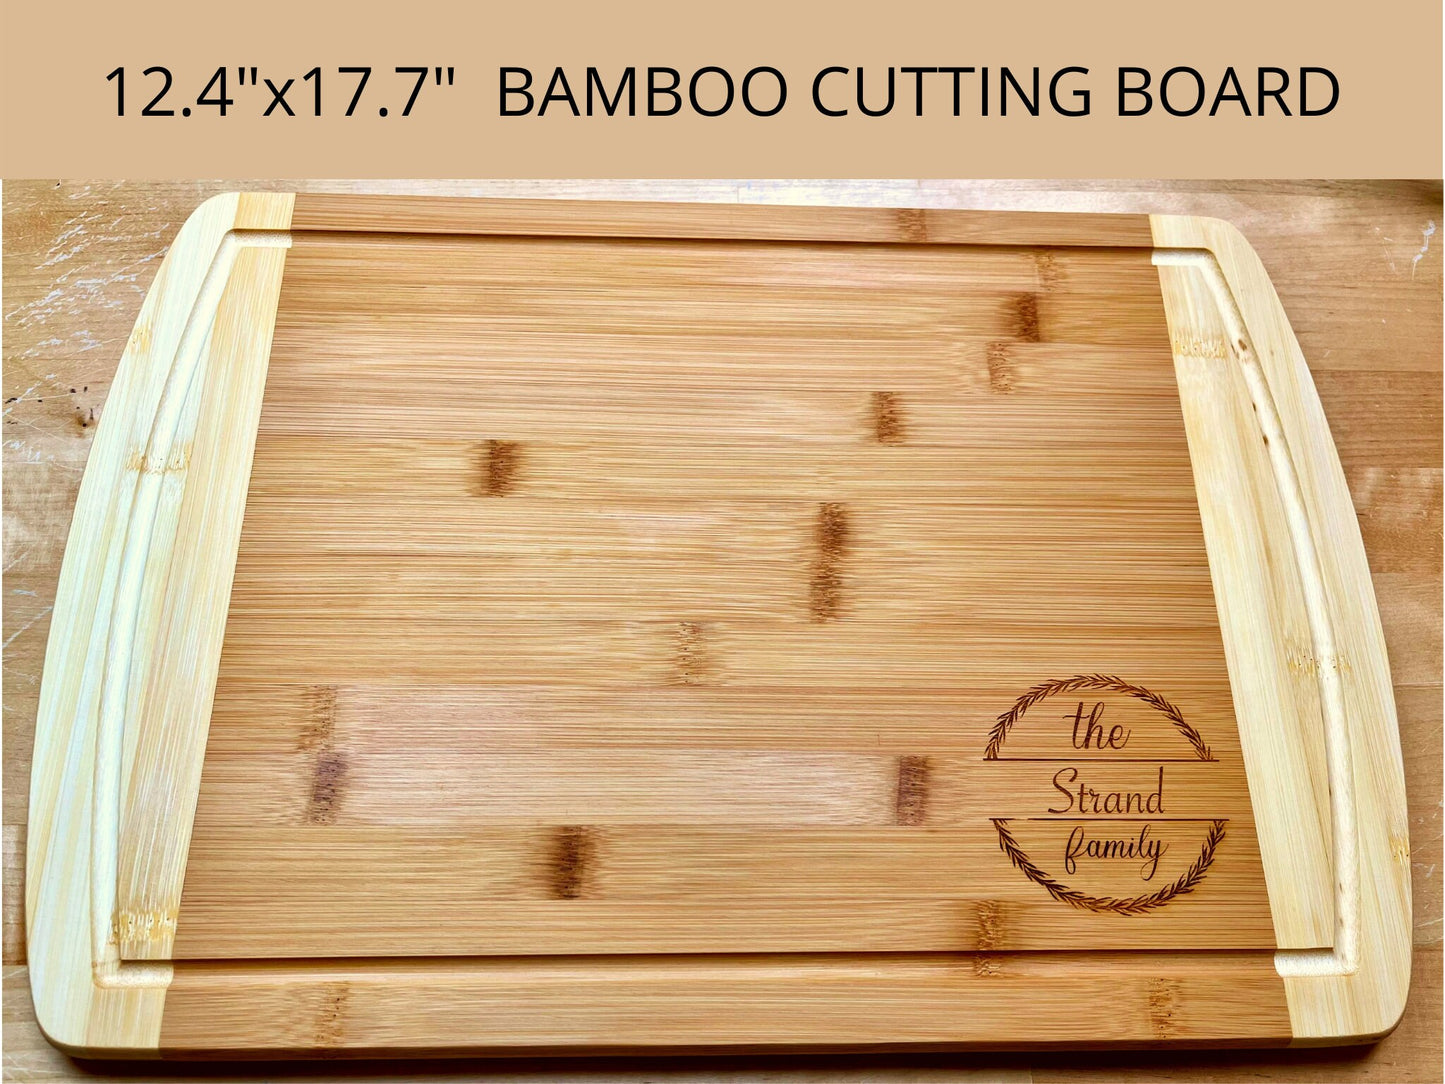 Engraved Cutting Board, Custom Bamboo Board, 18x13" Dimensions, Recipe Cutting Board, Bamboo Cutting Board Large, Bamboo Serving Tray